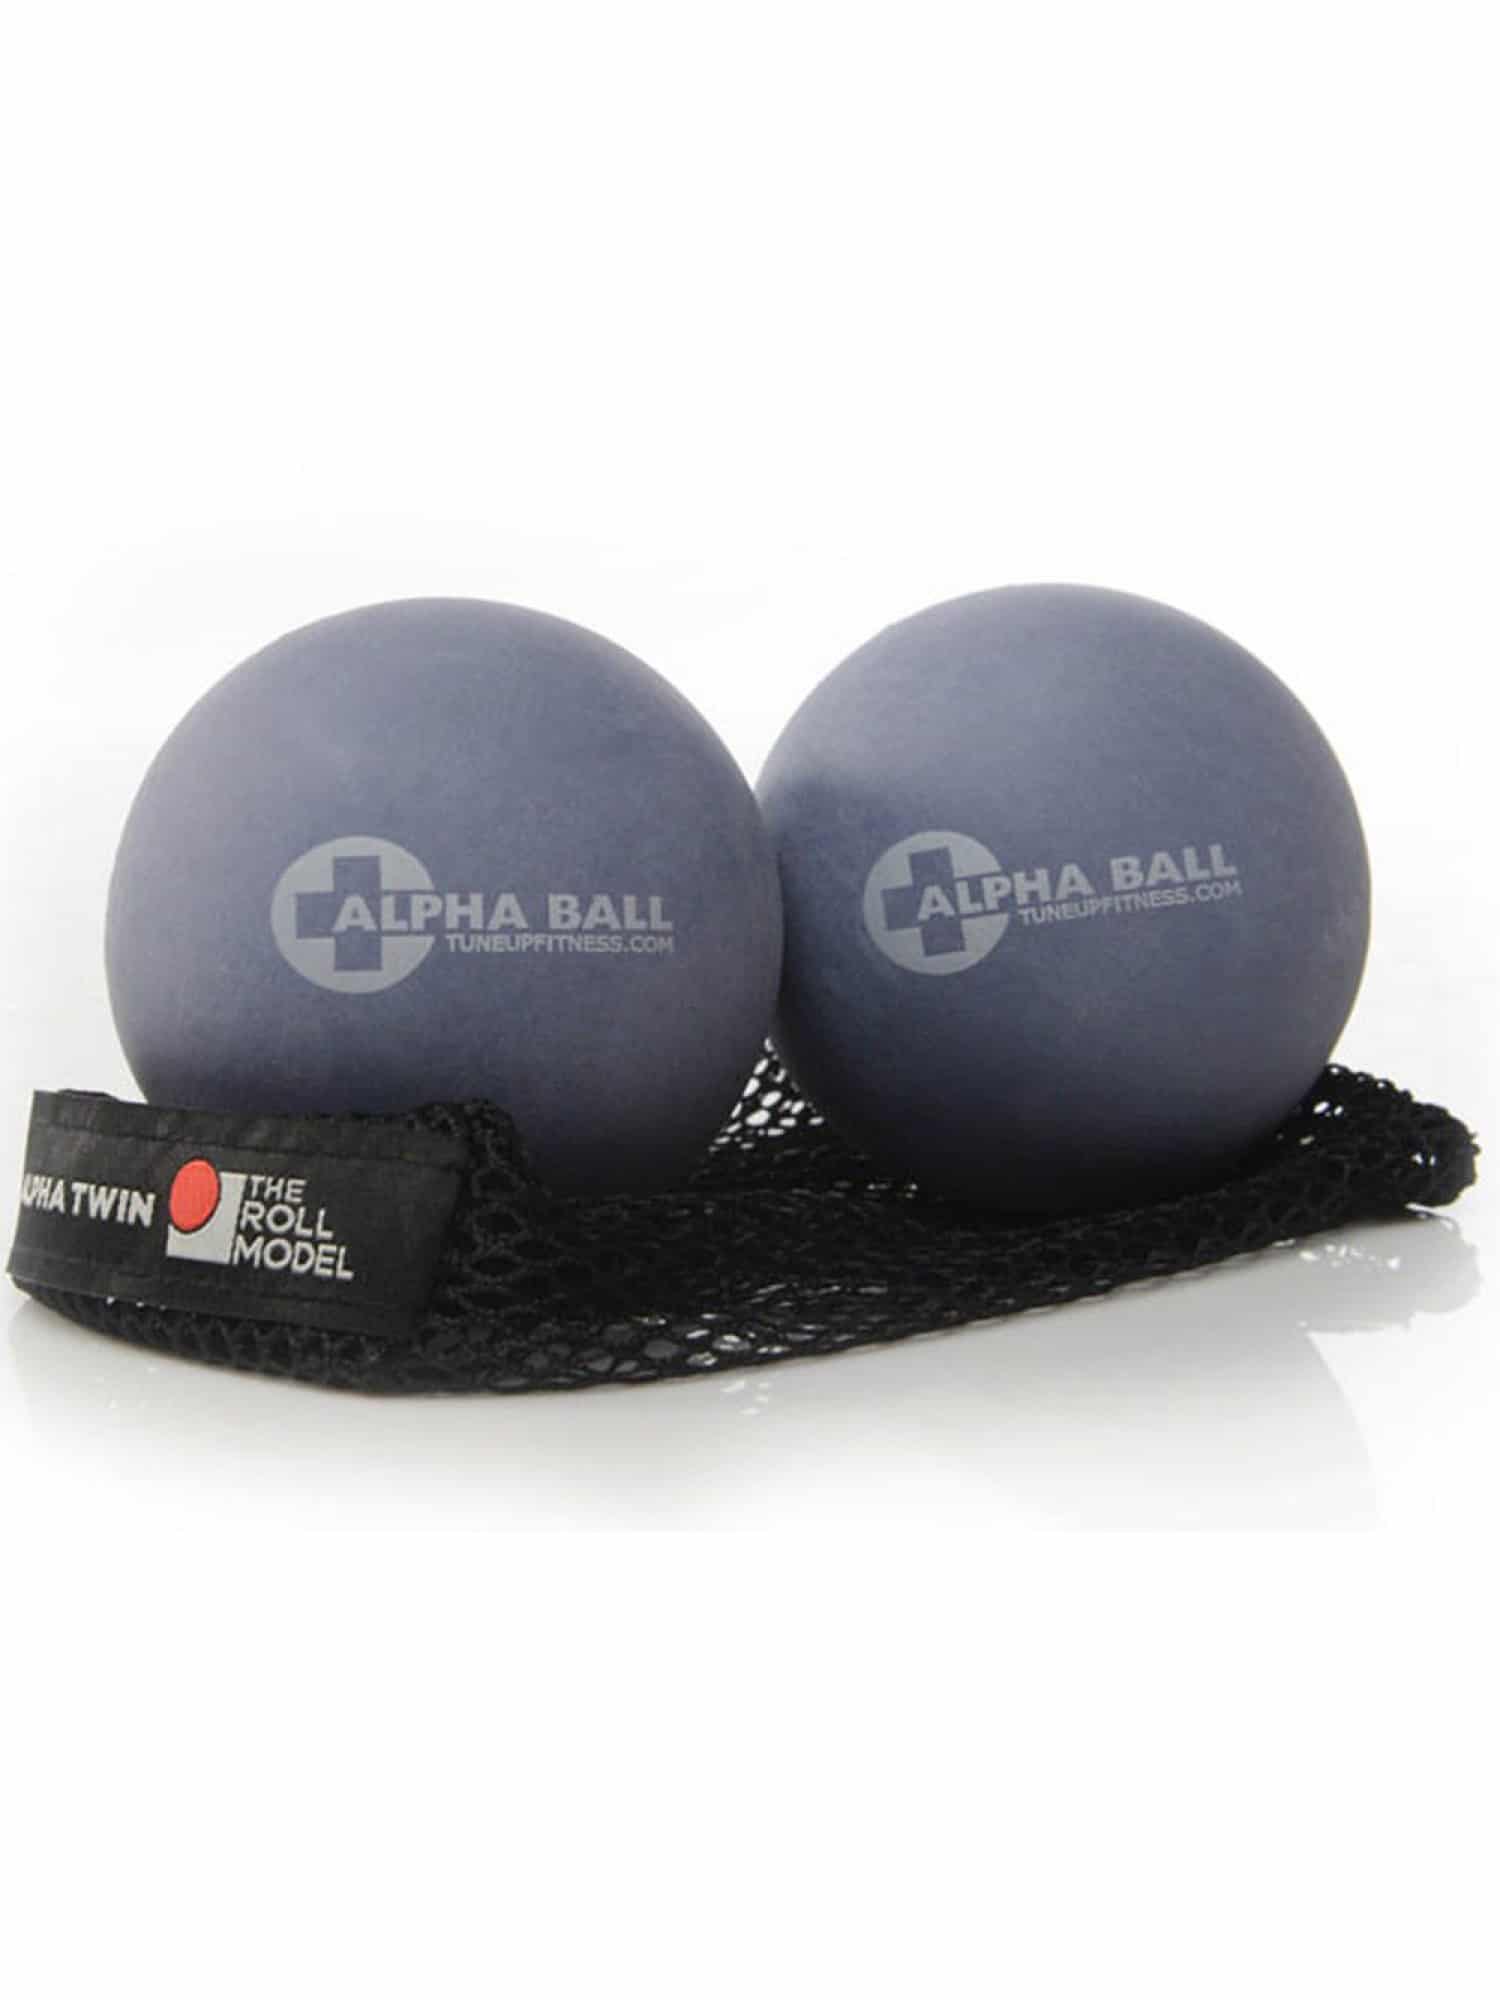 Yoga Tune Up Alpha Ball from Nice to meet me